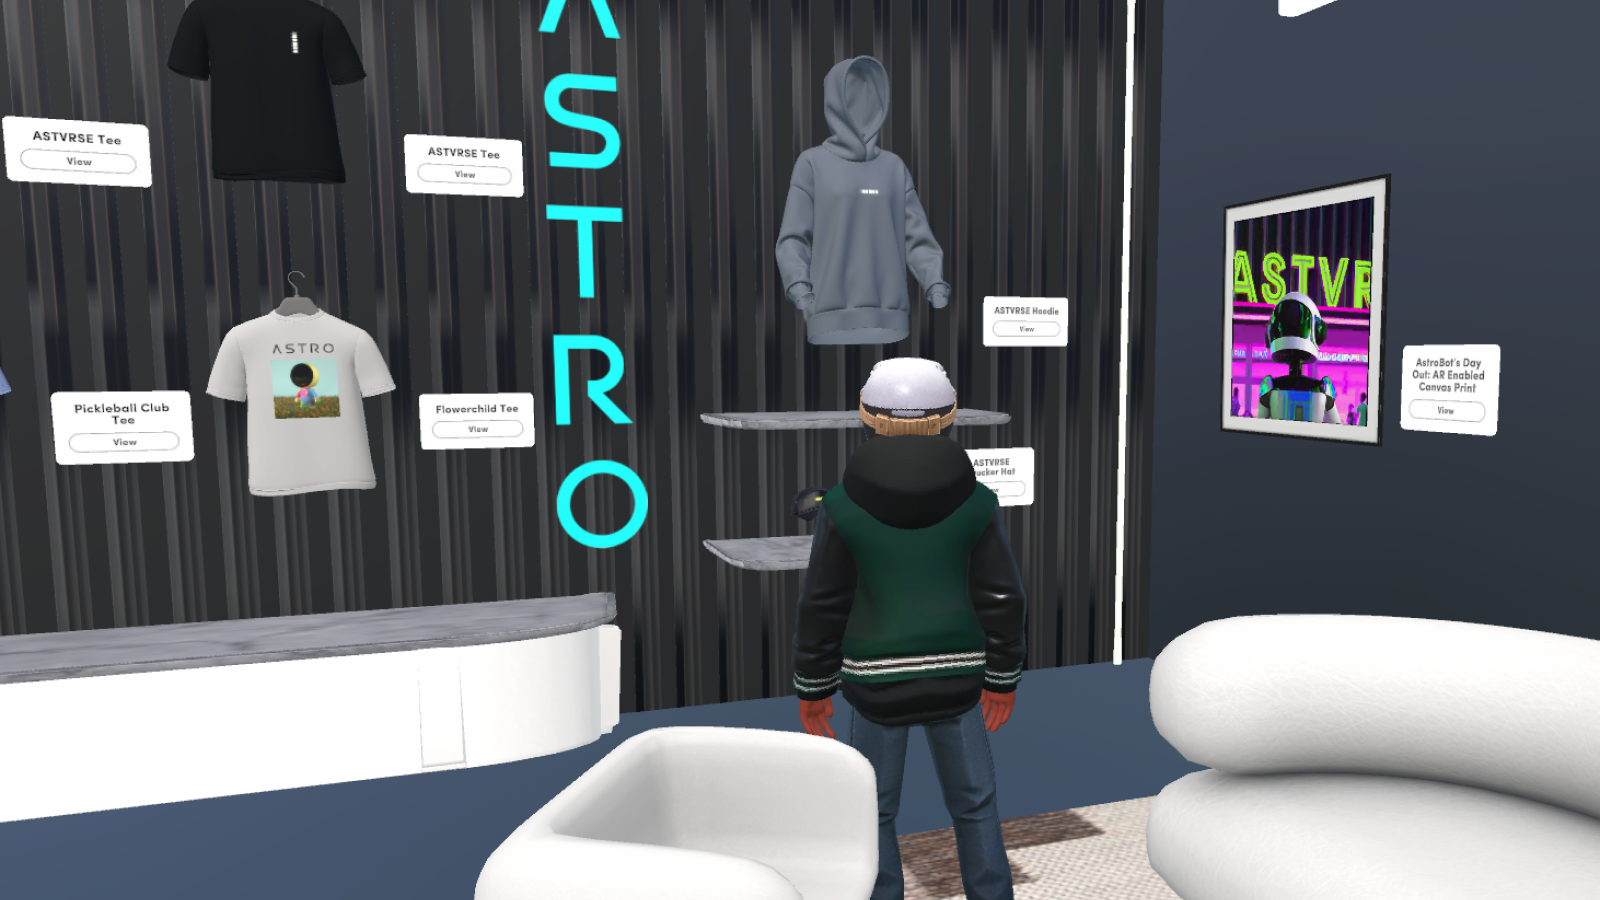 Players can explore your store in the virtual world